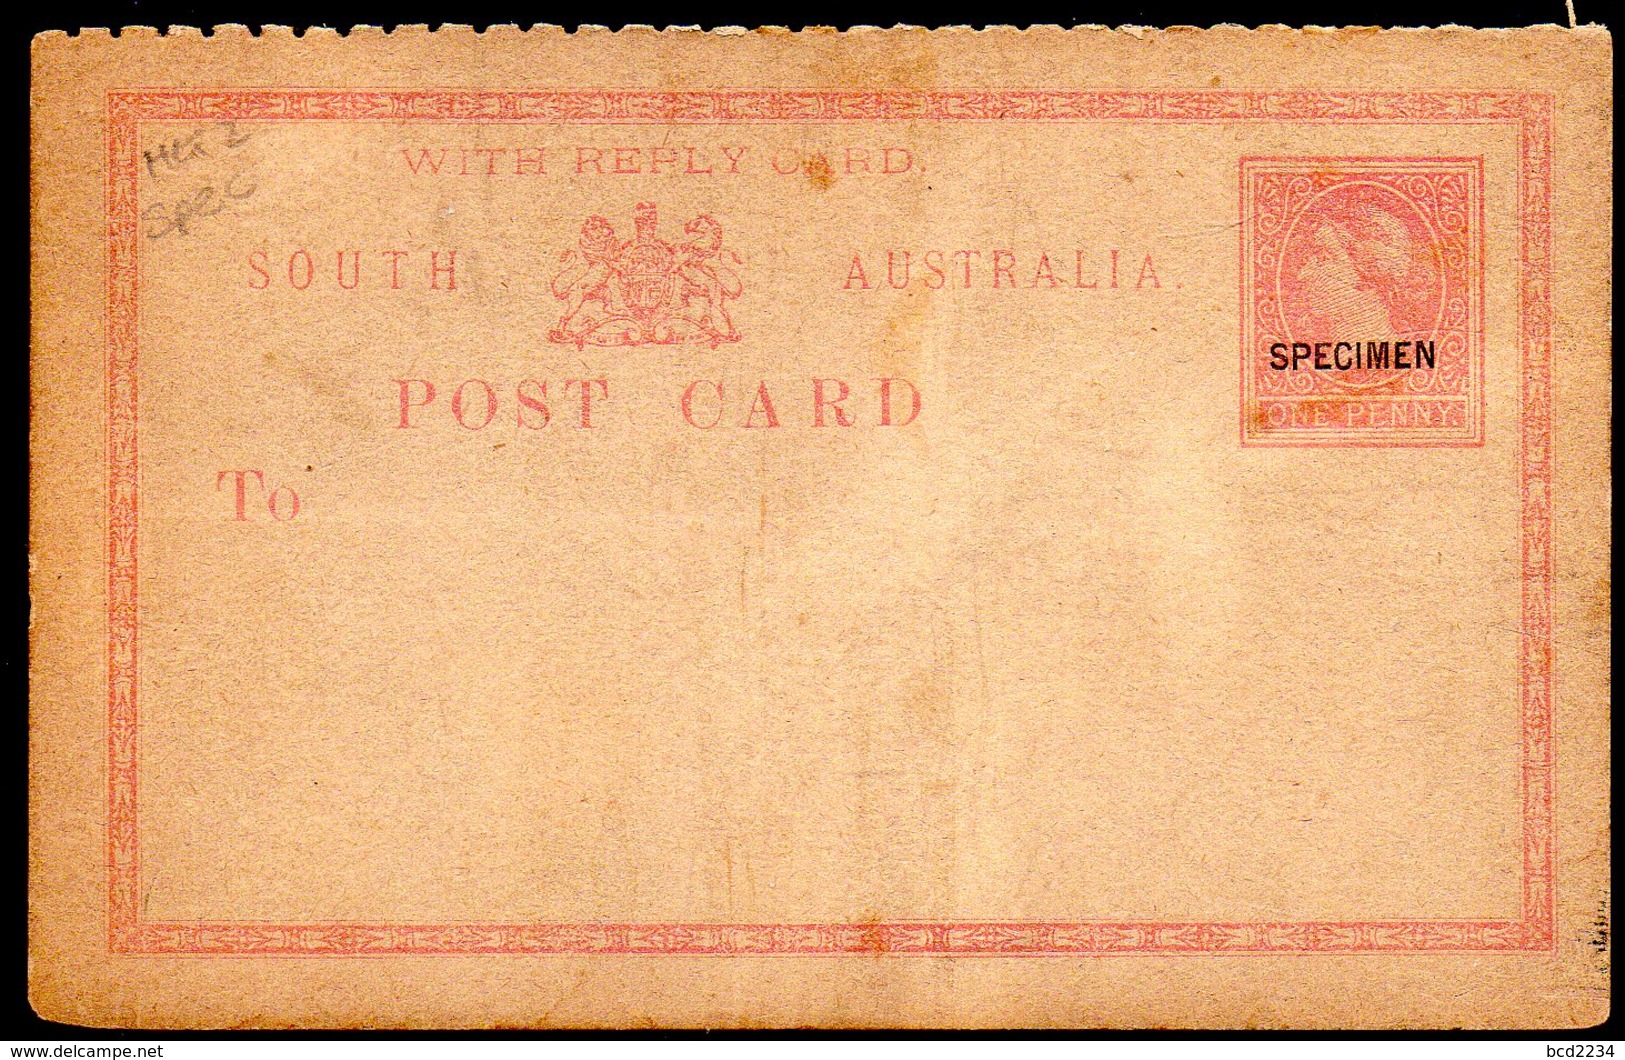 SOUTH AUSTRALIA OVERPRINT SPECIMEN POSTAL STATIONERY REPLY POST CARD UNUSED MINT - Covers & Documents